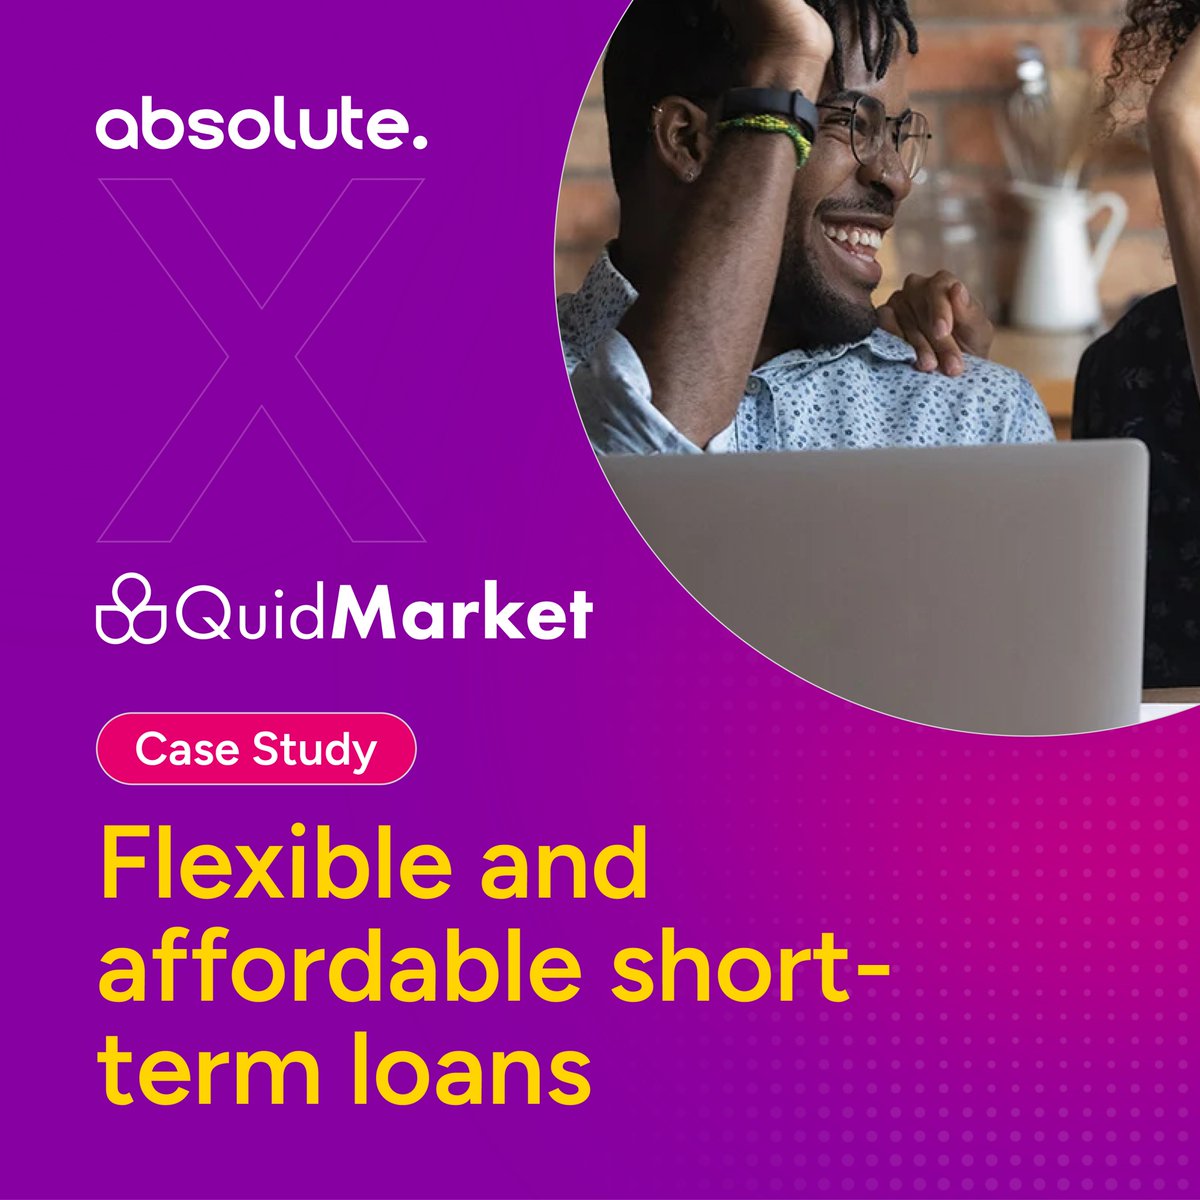 Promoting flexible and affordable short-term loans on behalf of QuidMarket 💰  

QuidMarket sought our expertise to increase website traffic and effectively convert clicks into customers by targeting highly competitive industry terms 🧵 :